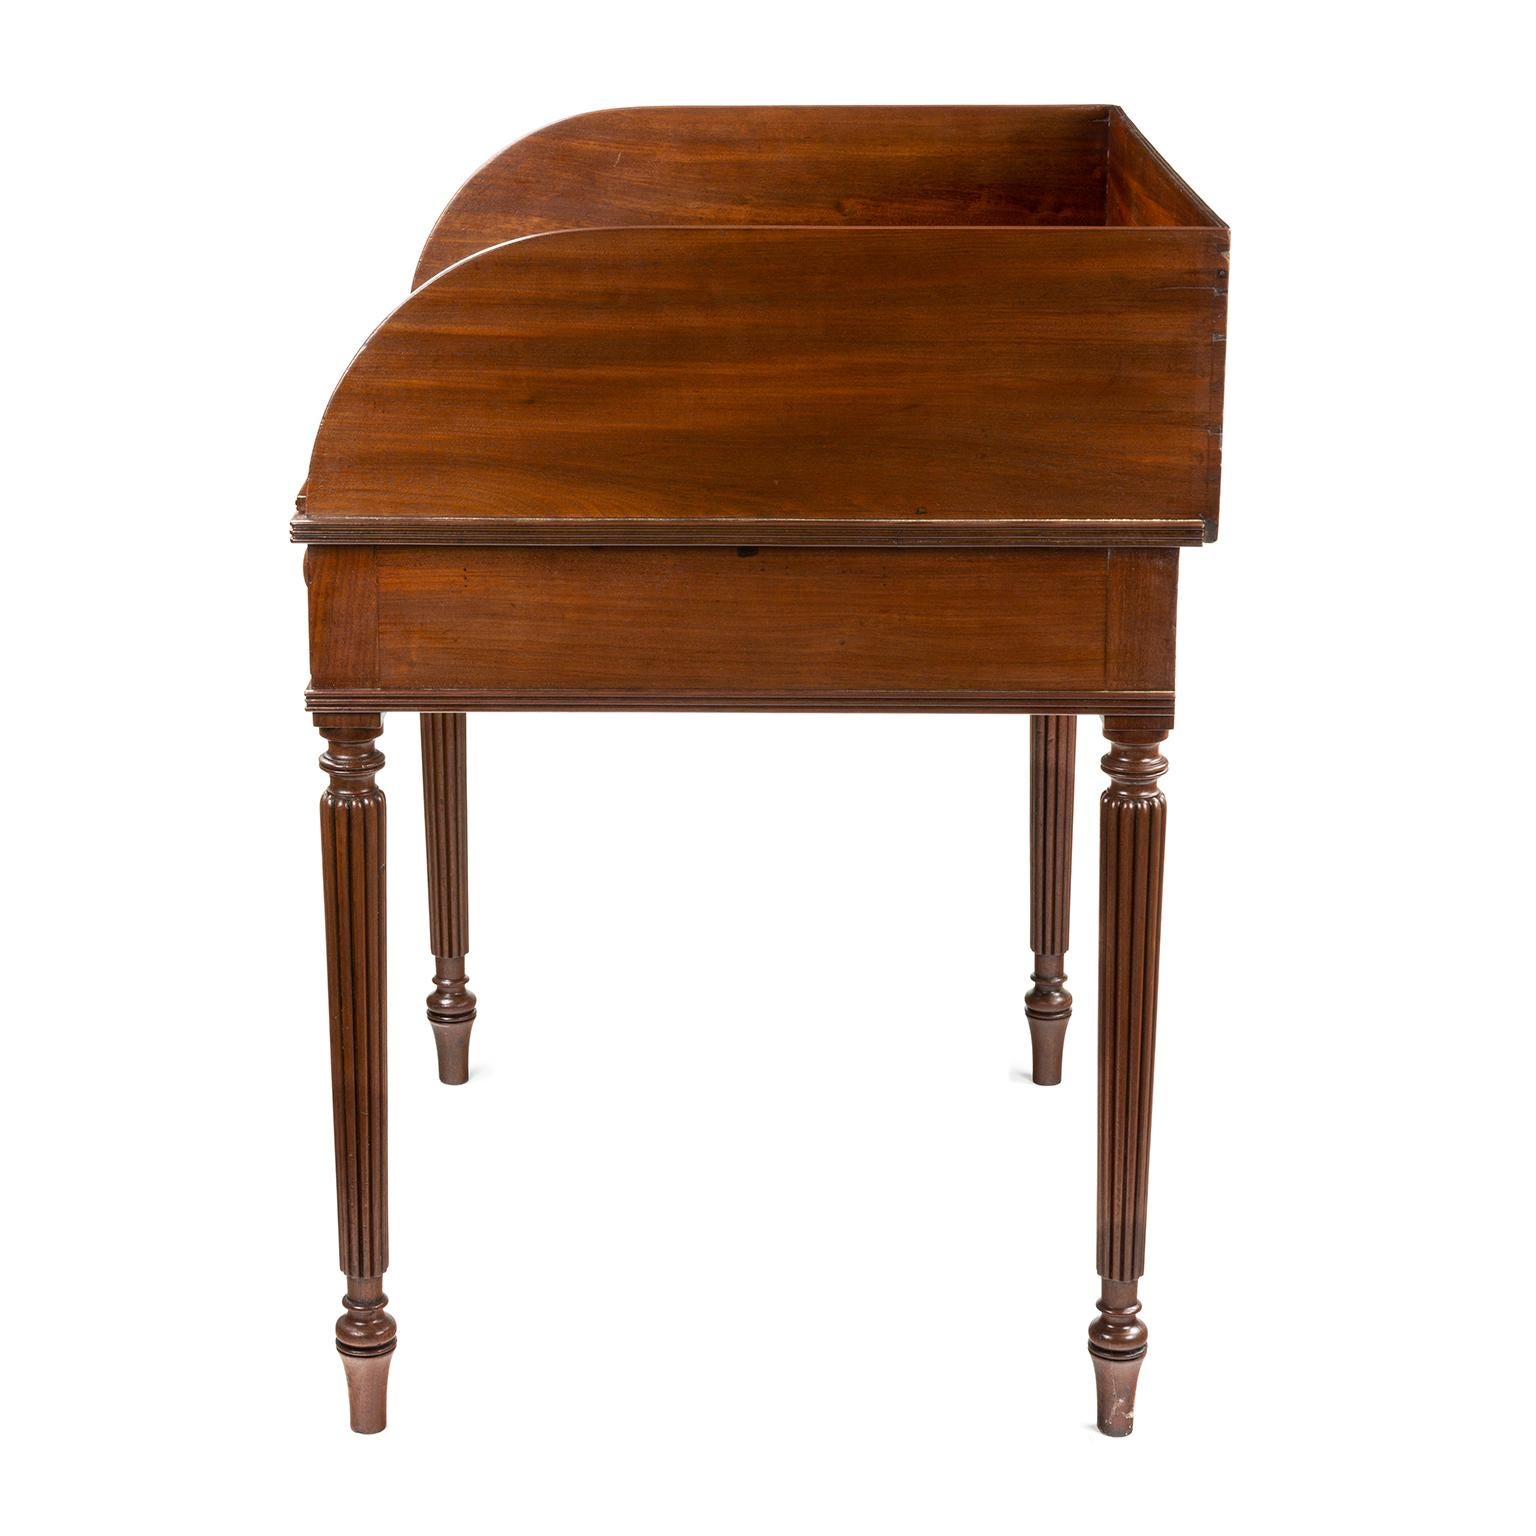 Regency Gillows wash stand / writing table in Mahogany 3